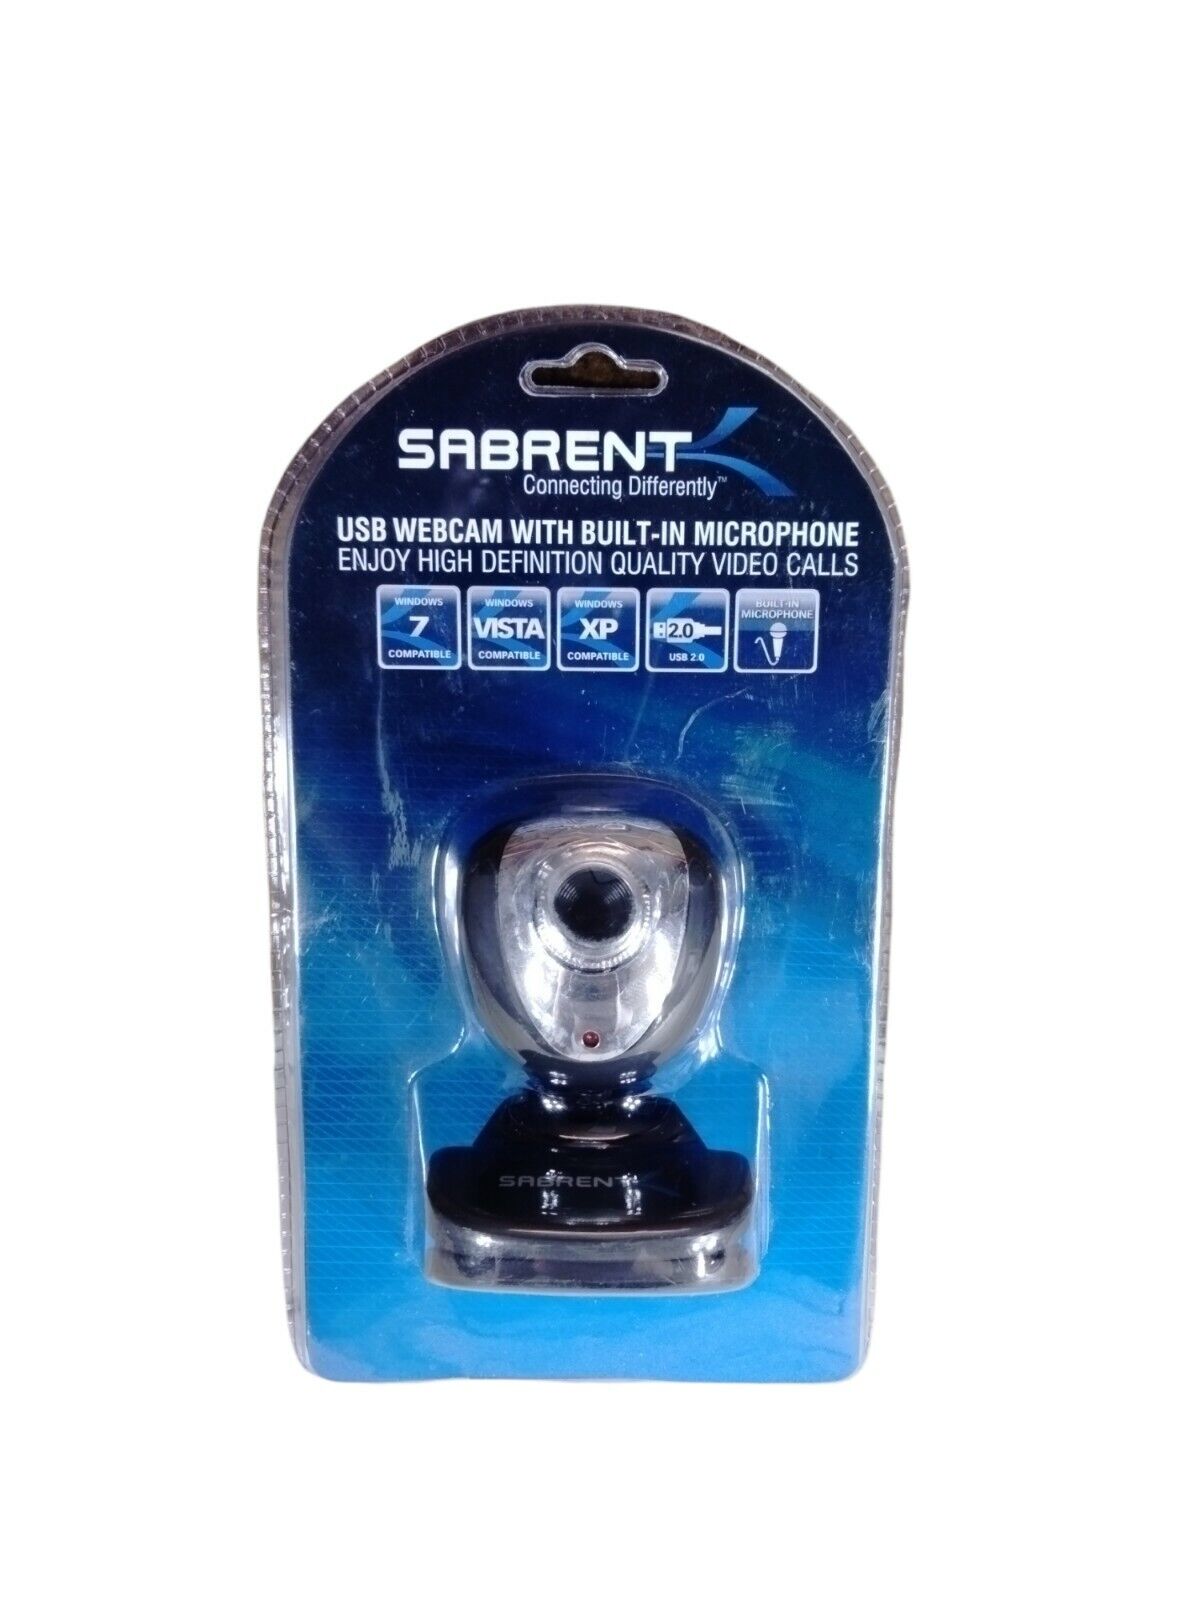 Sabrent USB Web Camera Color USB 2.0 with Built-in Audio Microphone SBT-WCCK